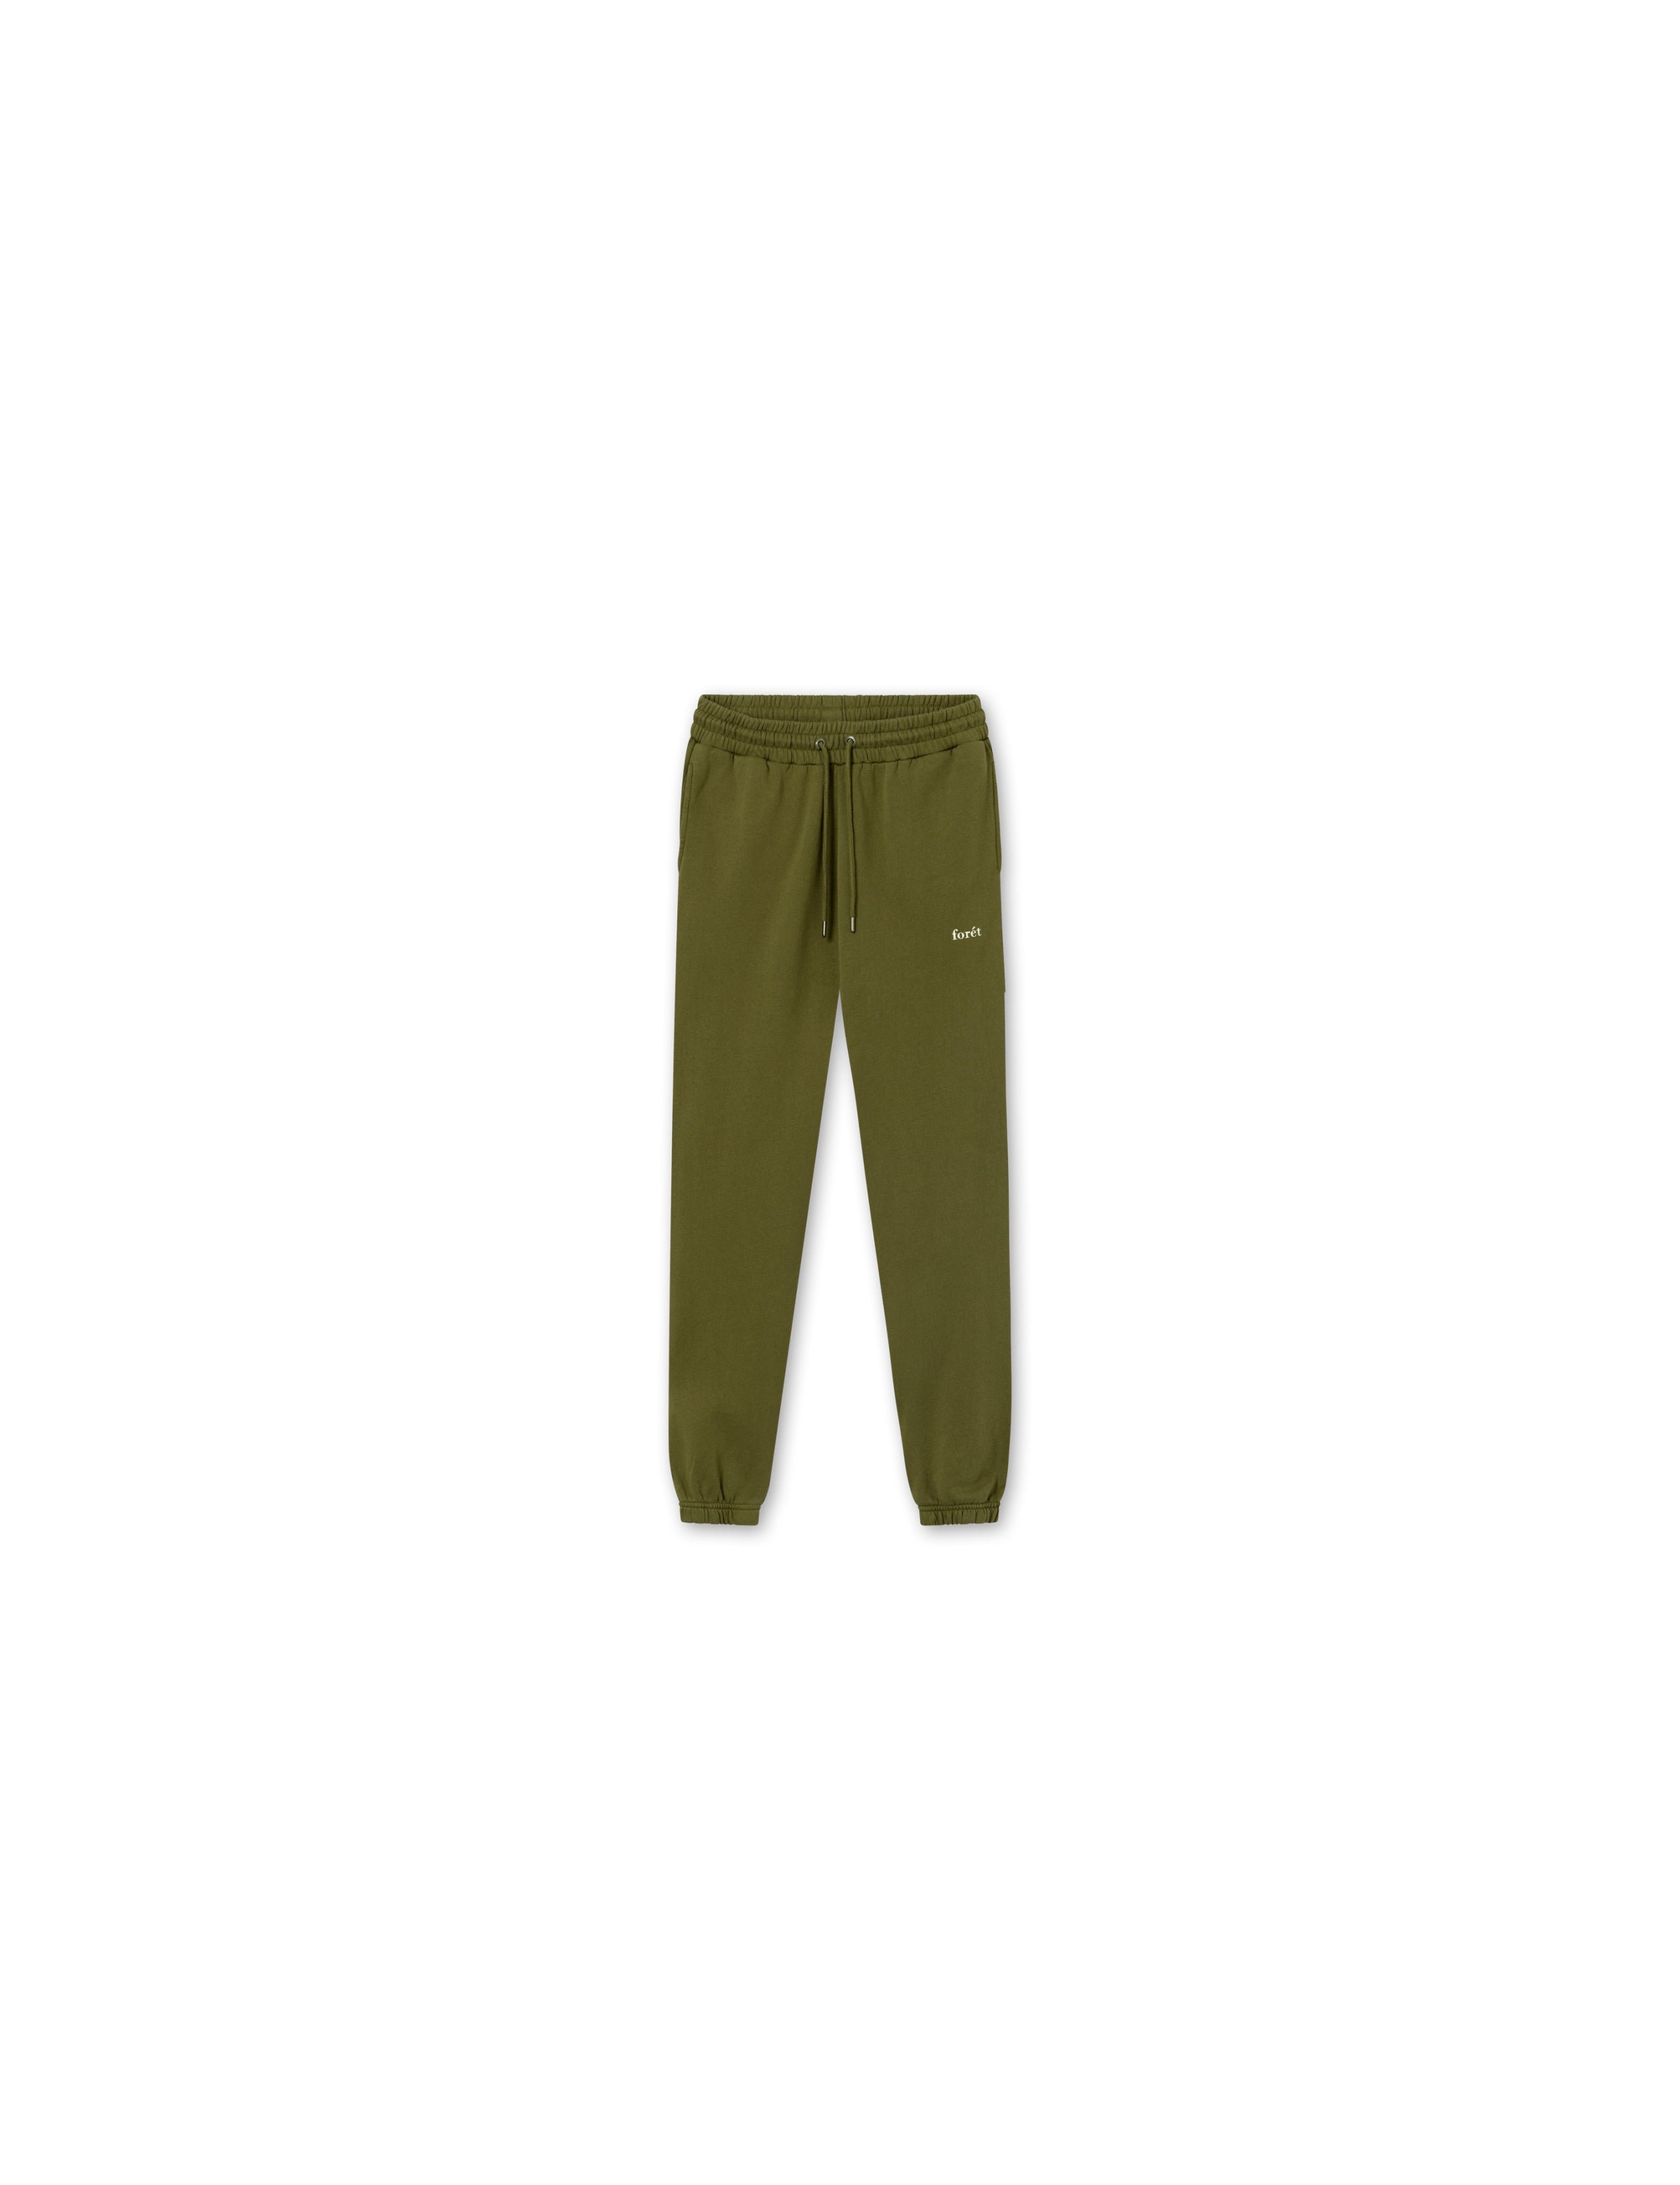 CATTLE SWEATPANTS - ARMY